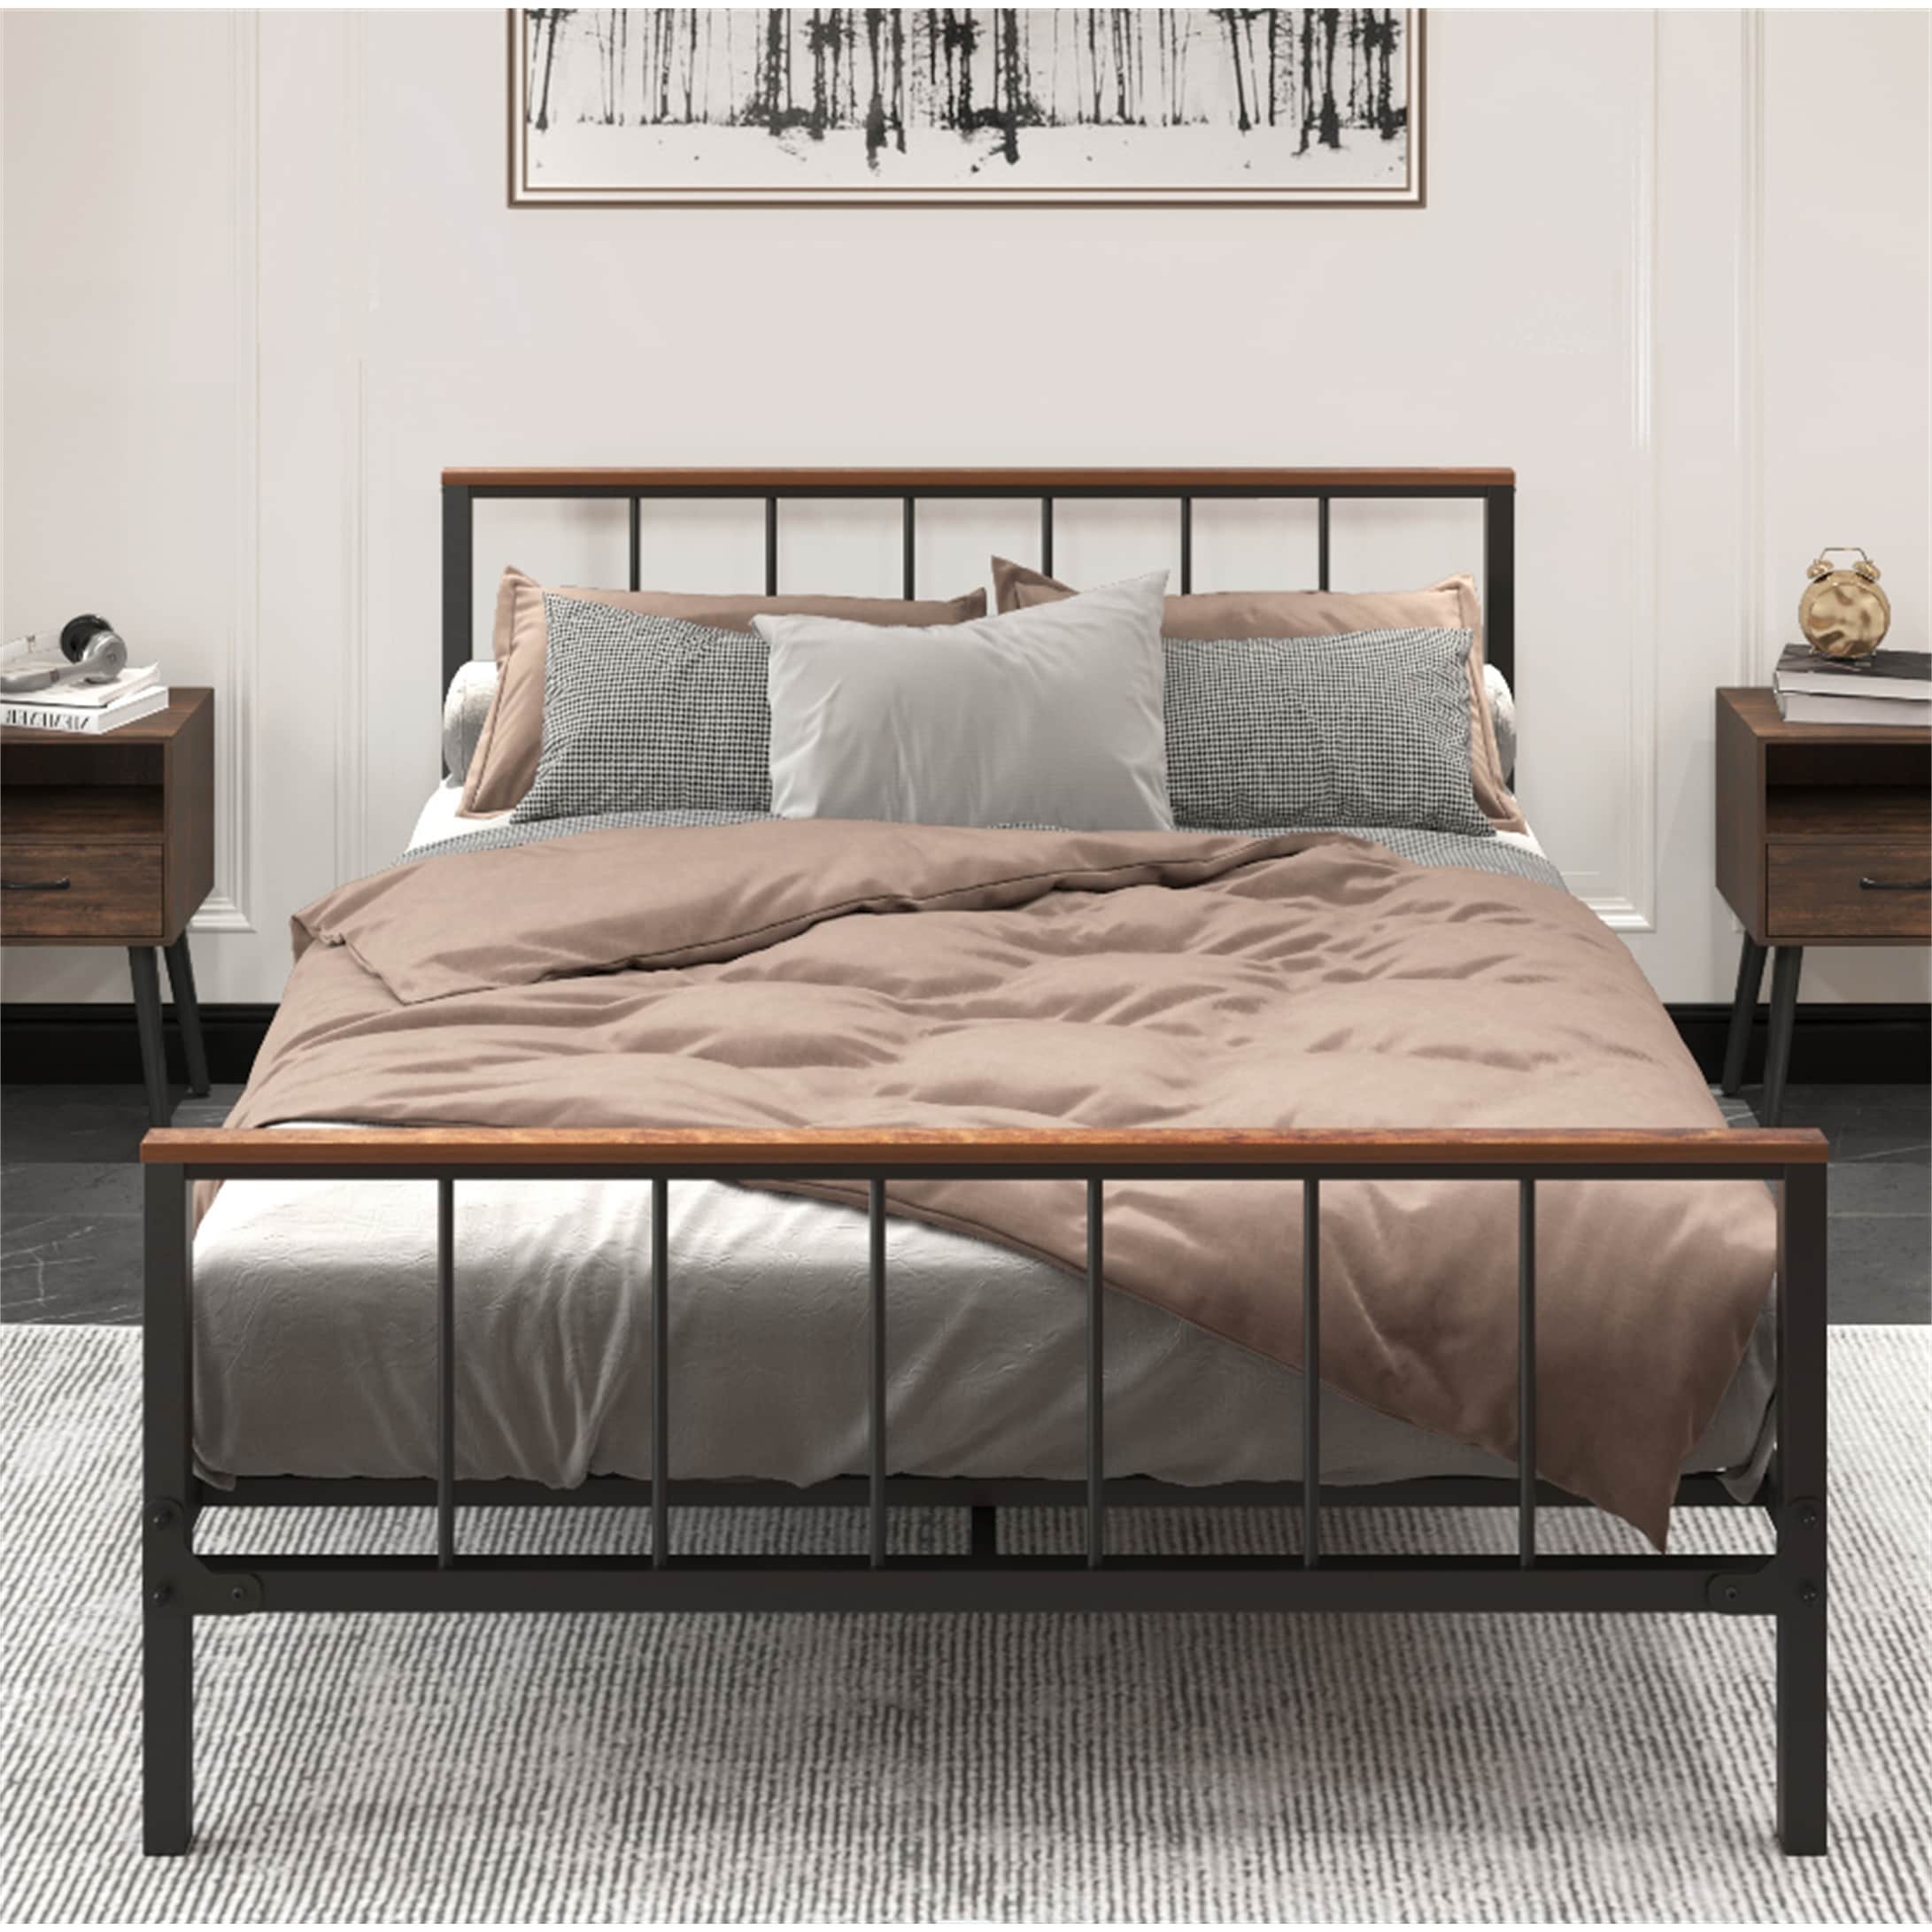 Metal Queen Size Platform Bed Frame With Headboard And Footboard